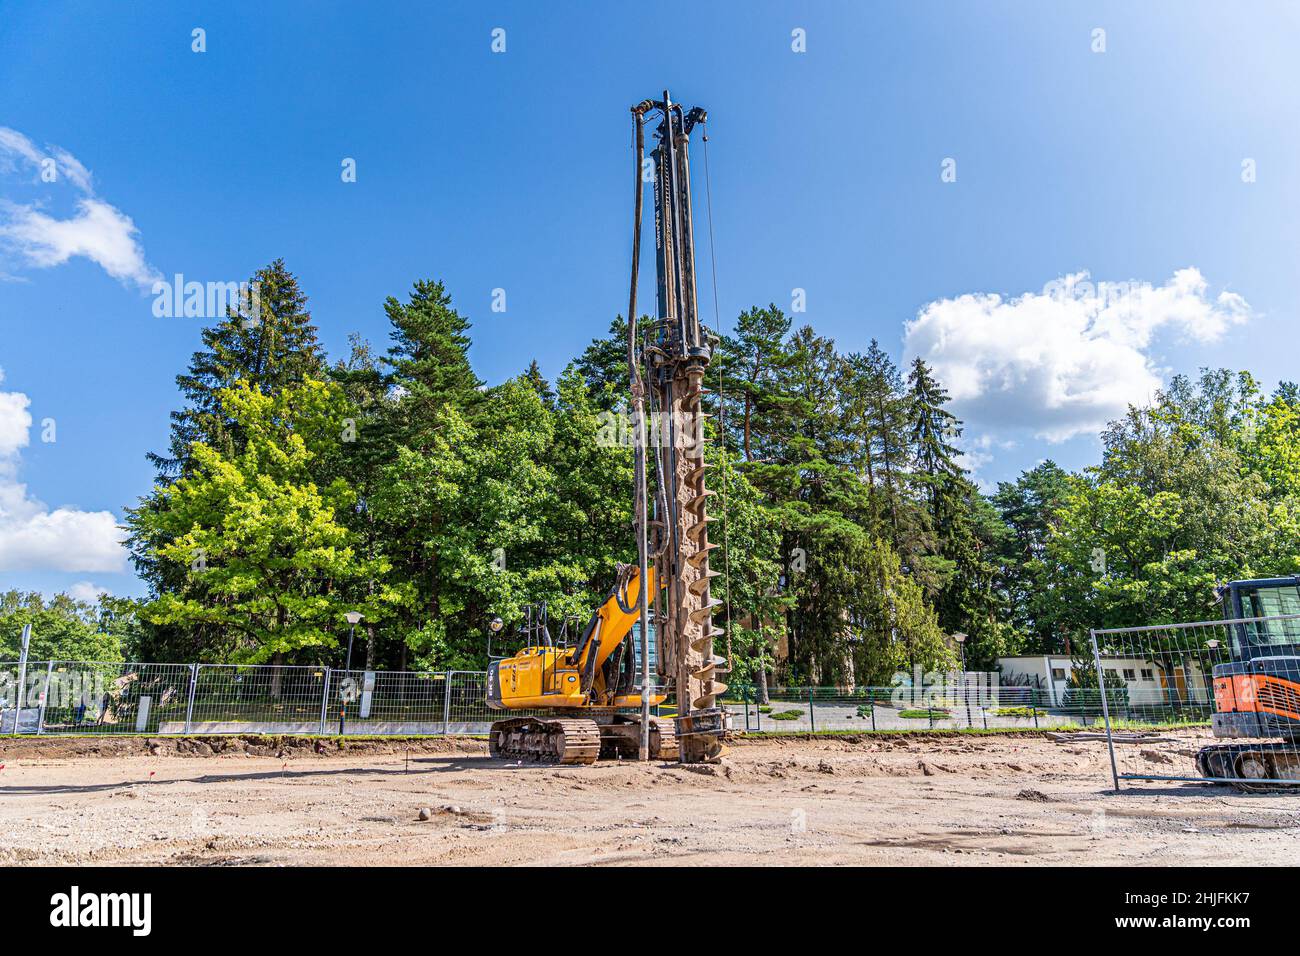 Drilling machine outdoors on construction site, sunny day. Stock Photo